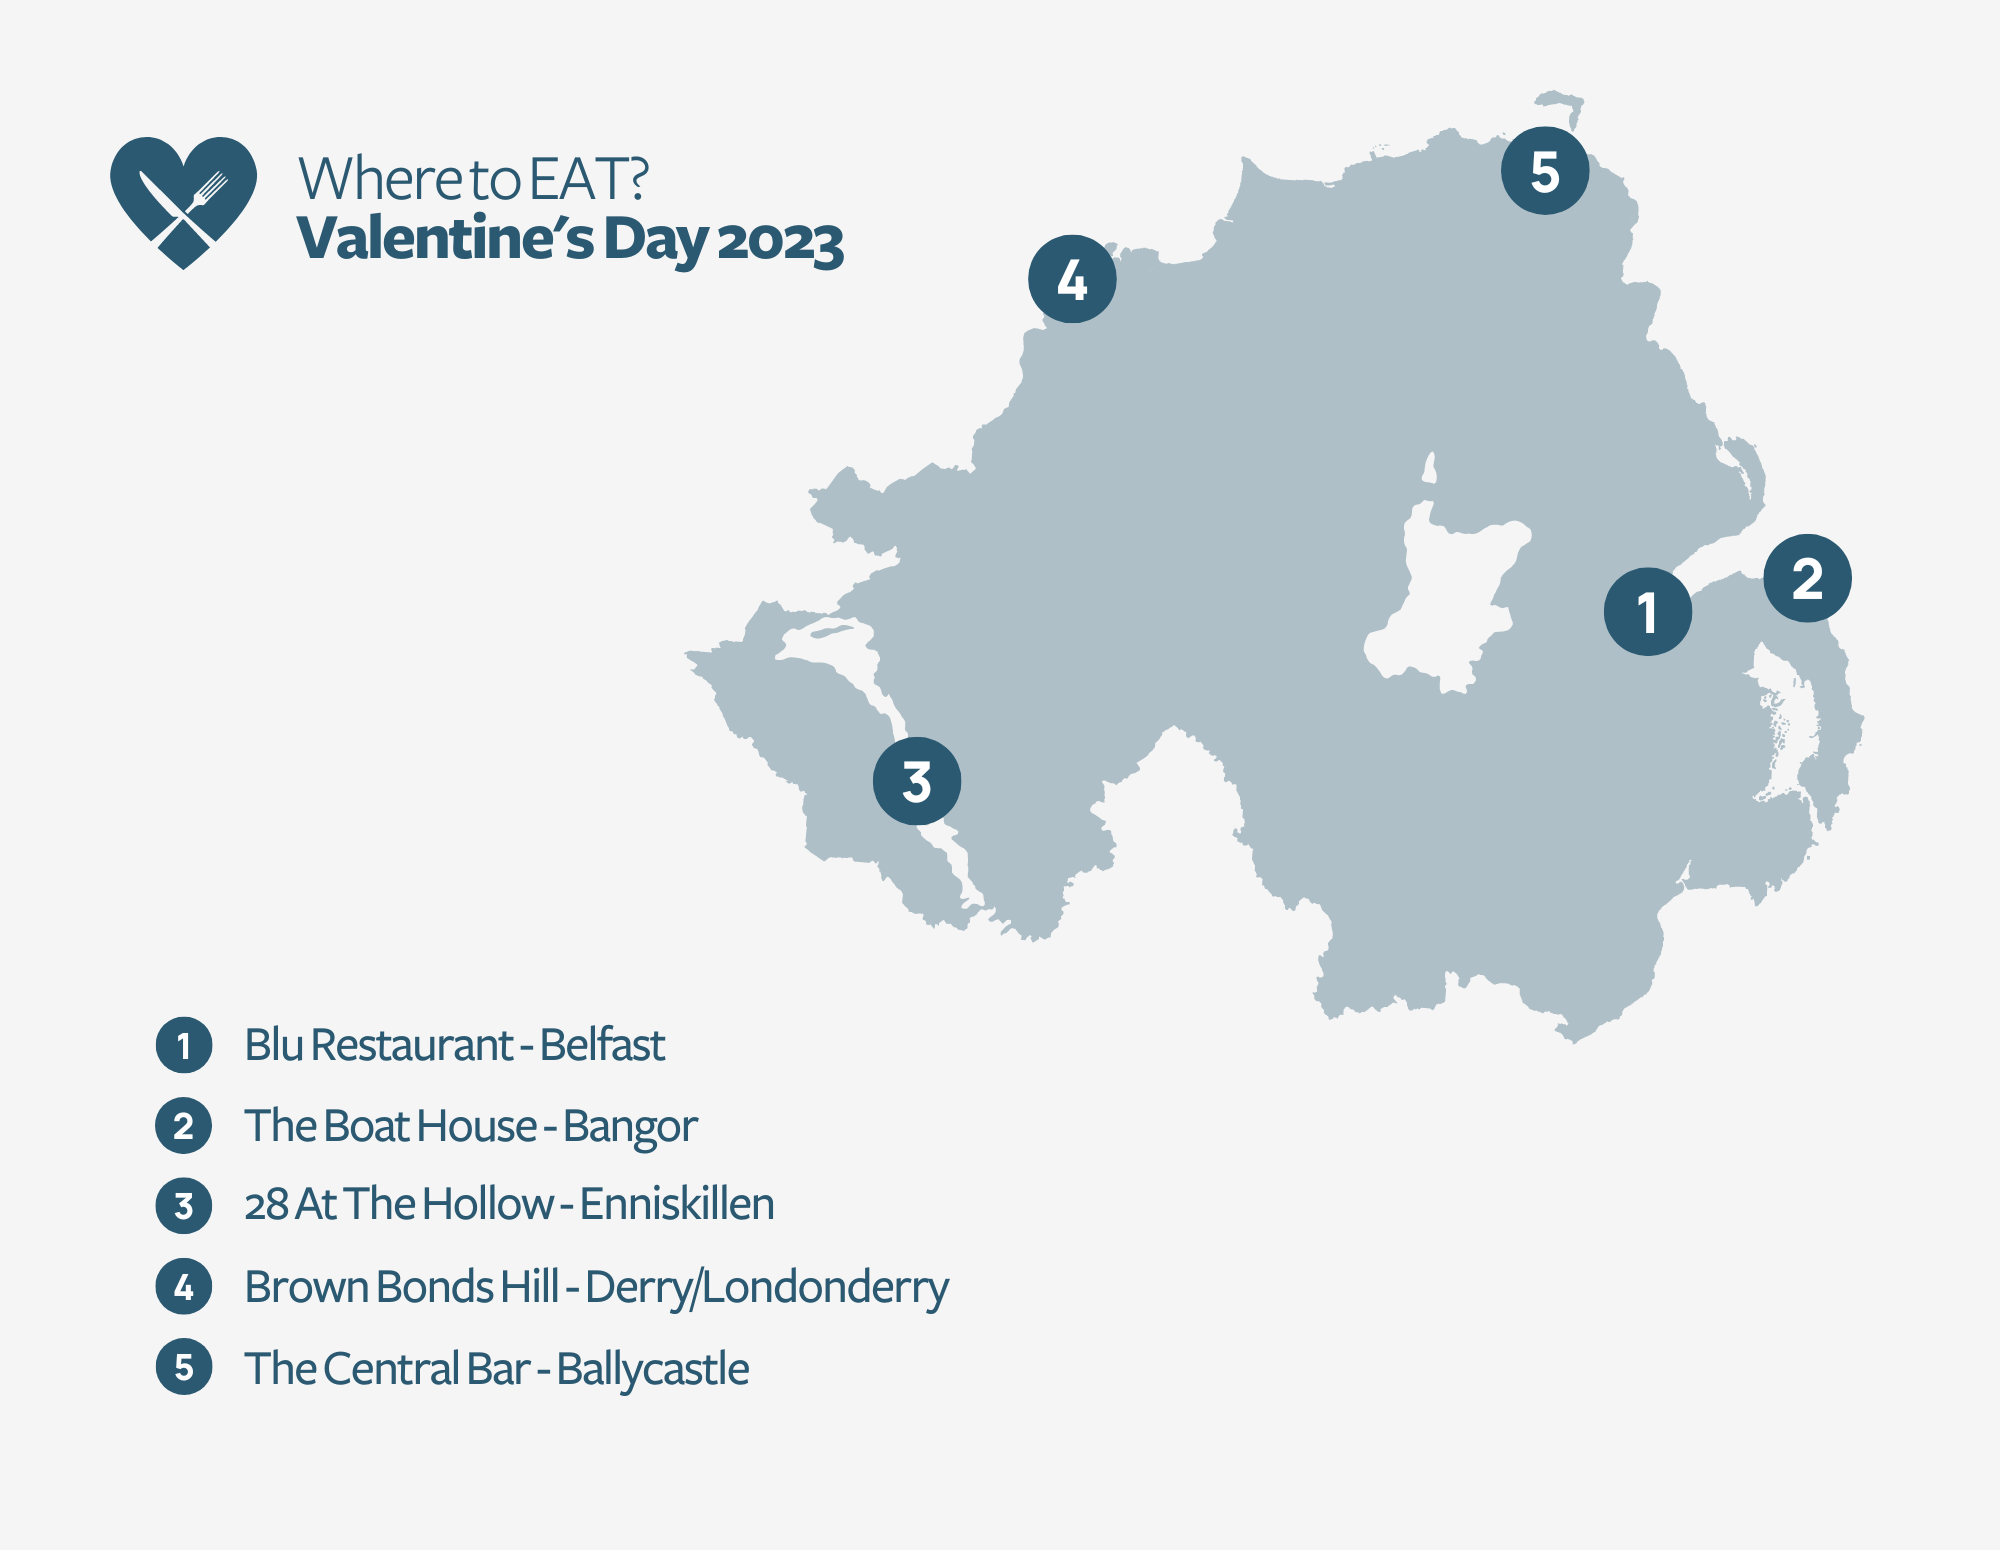 Where to eat in Northern Ireland for Valentines Day 2023